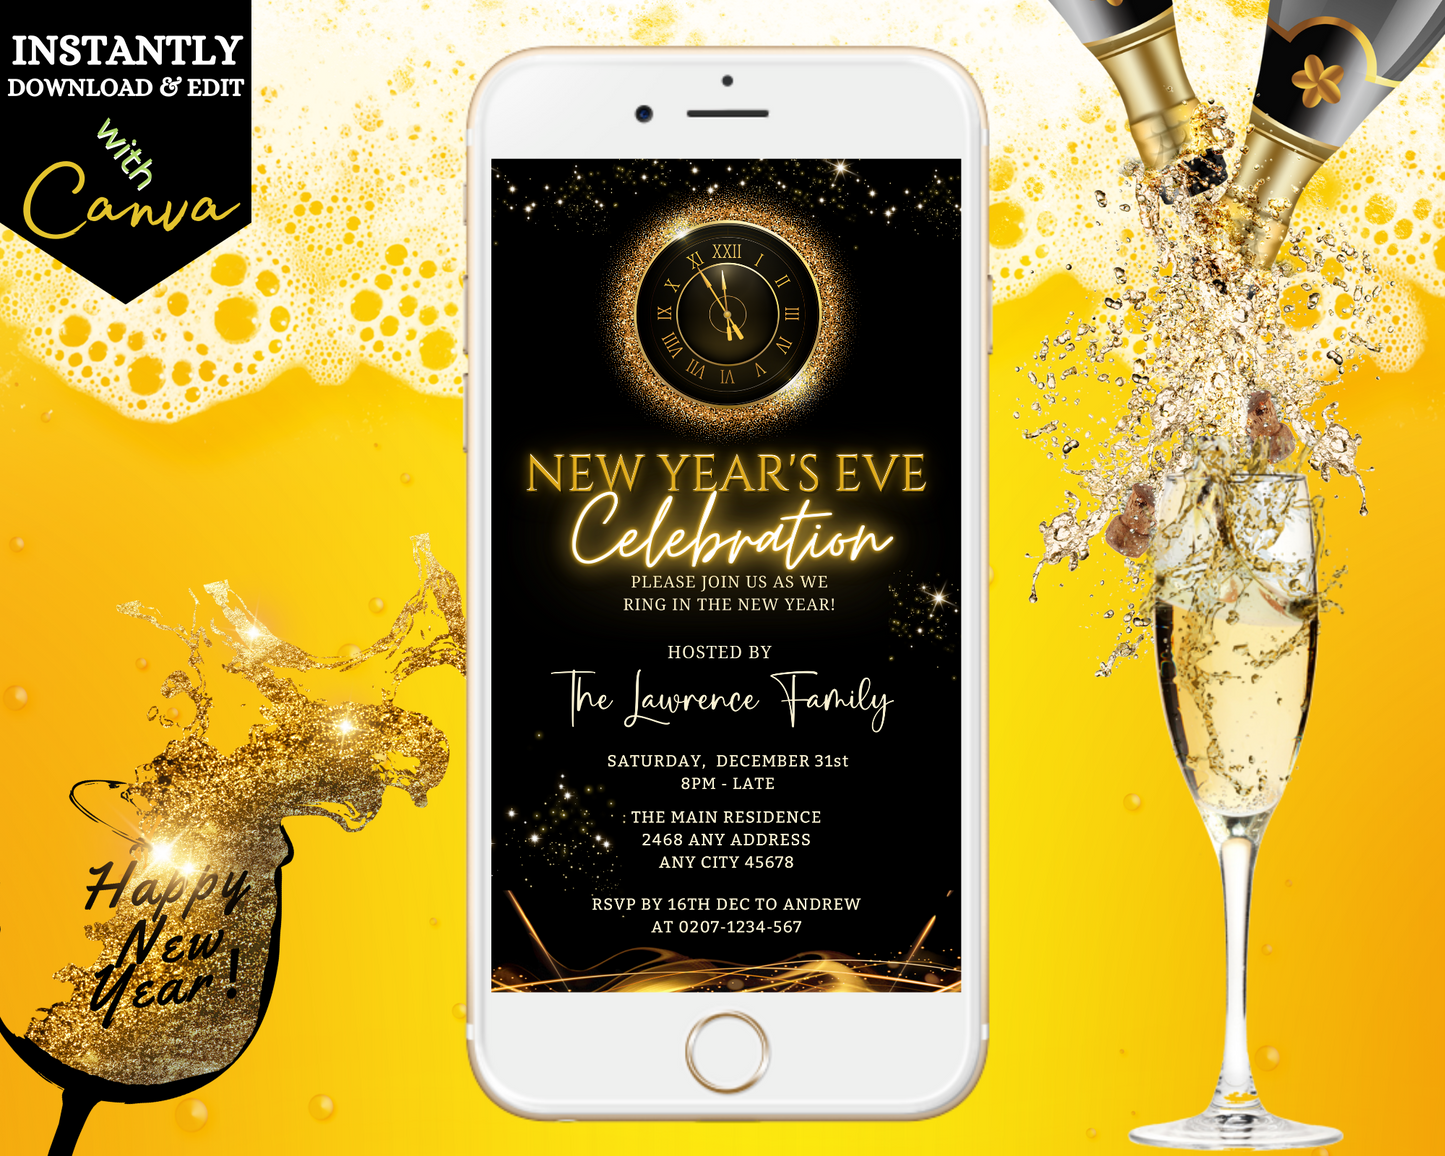 Gold Glitter Clock Celebration Neon Evite on smartphone next to a champagne glass, showcasing a customizable New Year's Eve party invitation template.